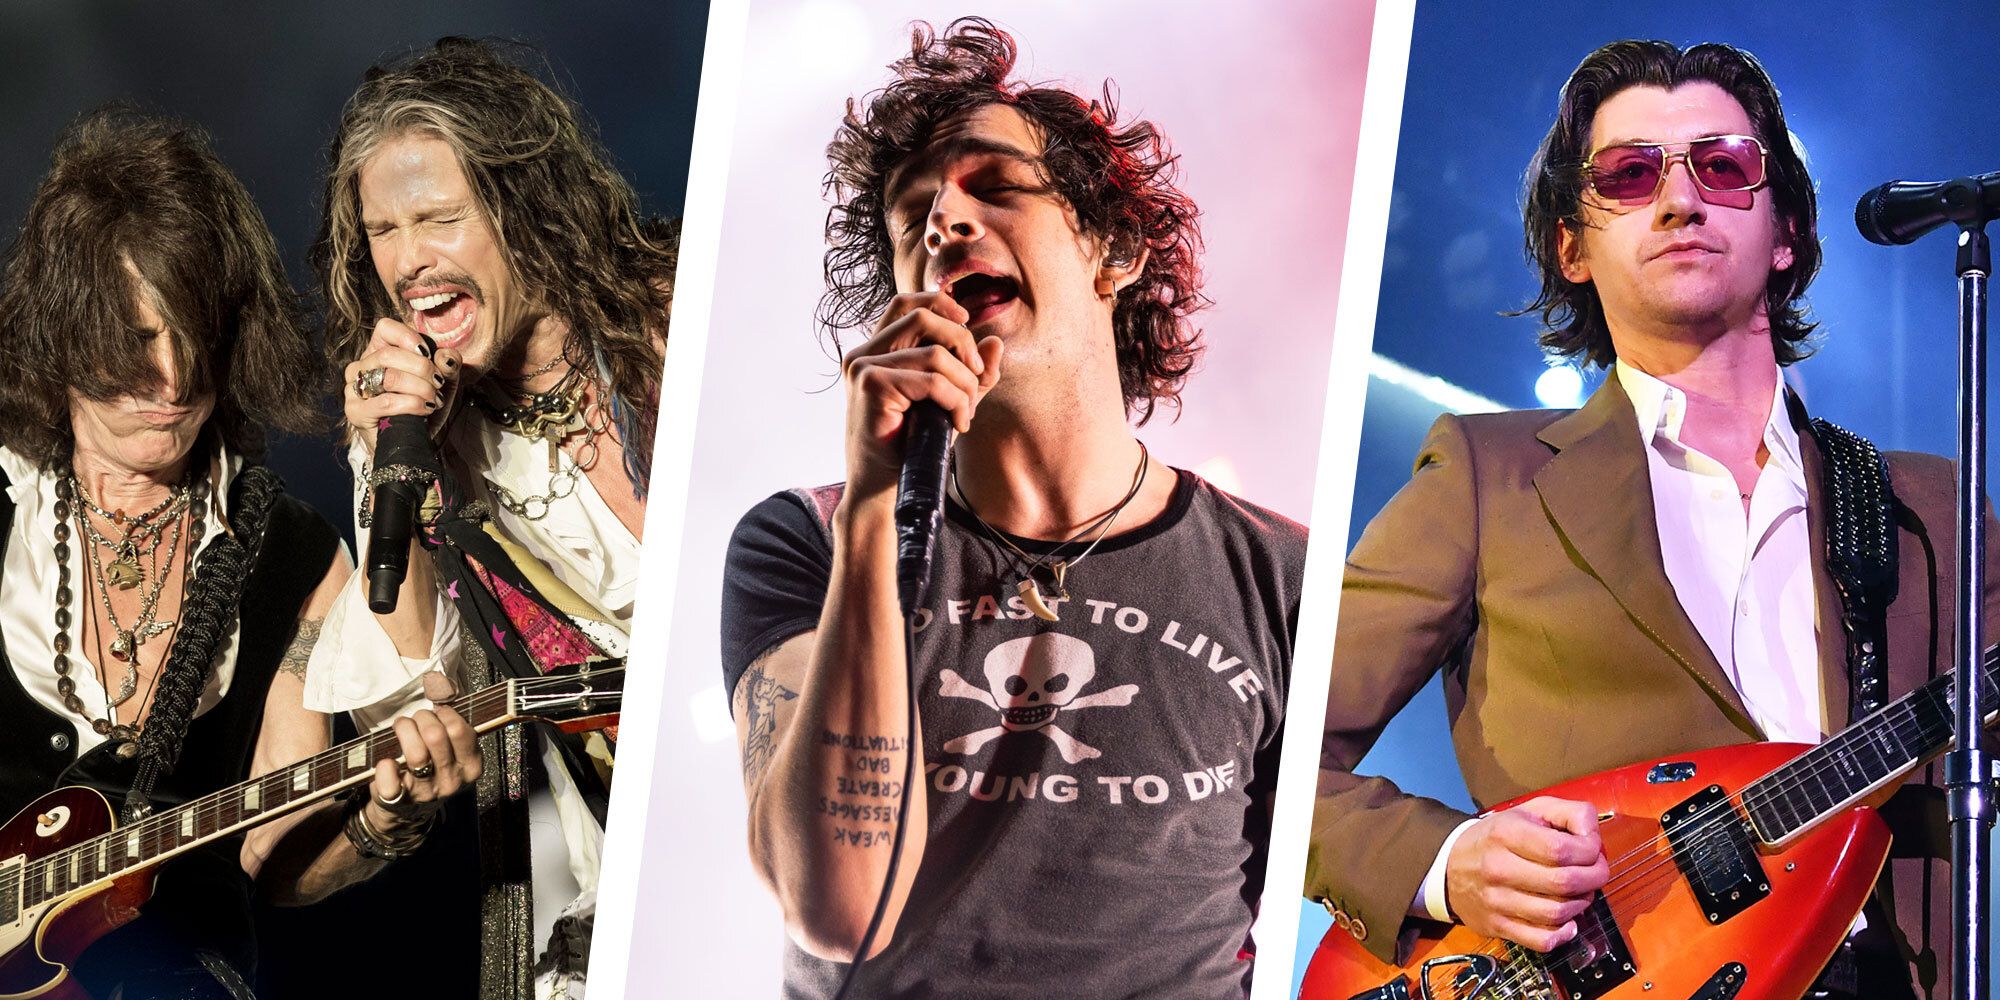 25 Rock Love Songs - The Best Rock Love Songs of All Time